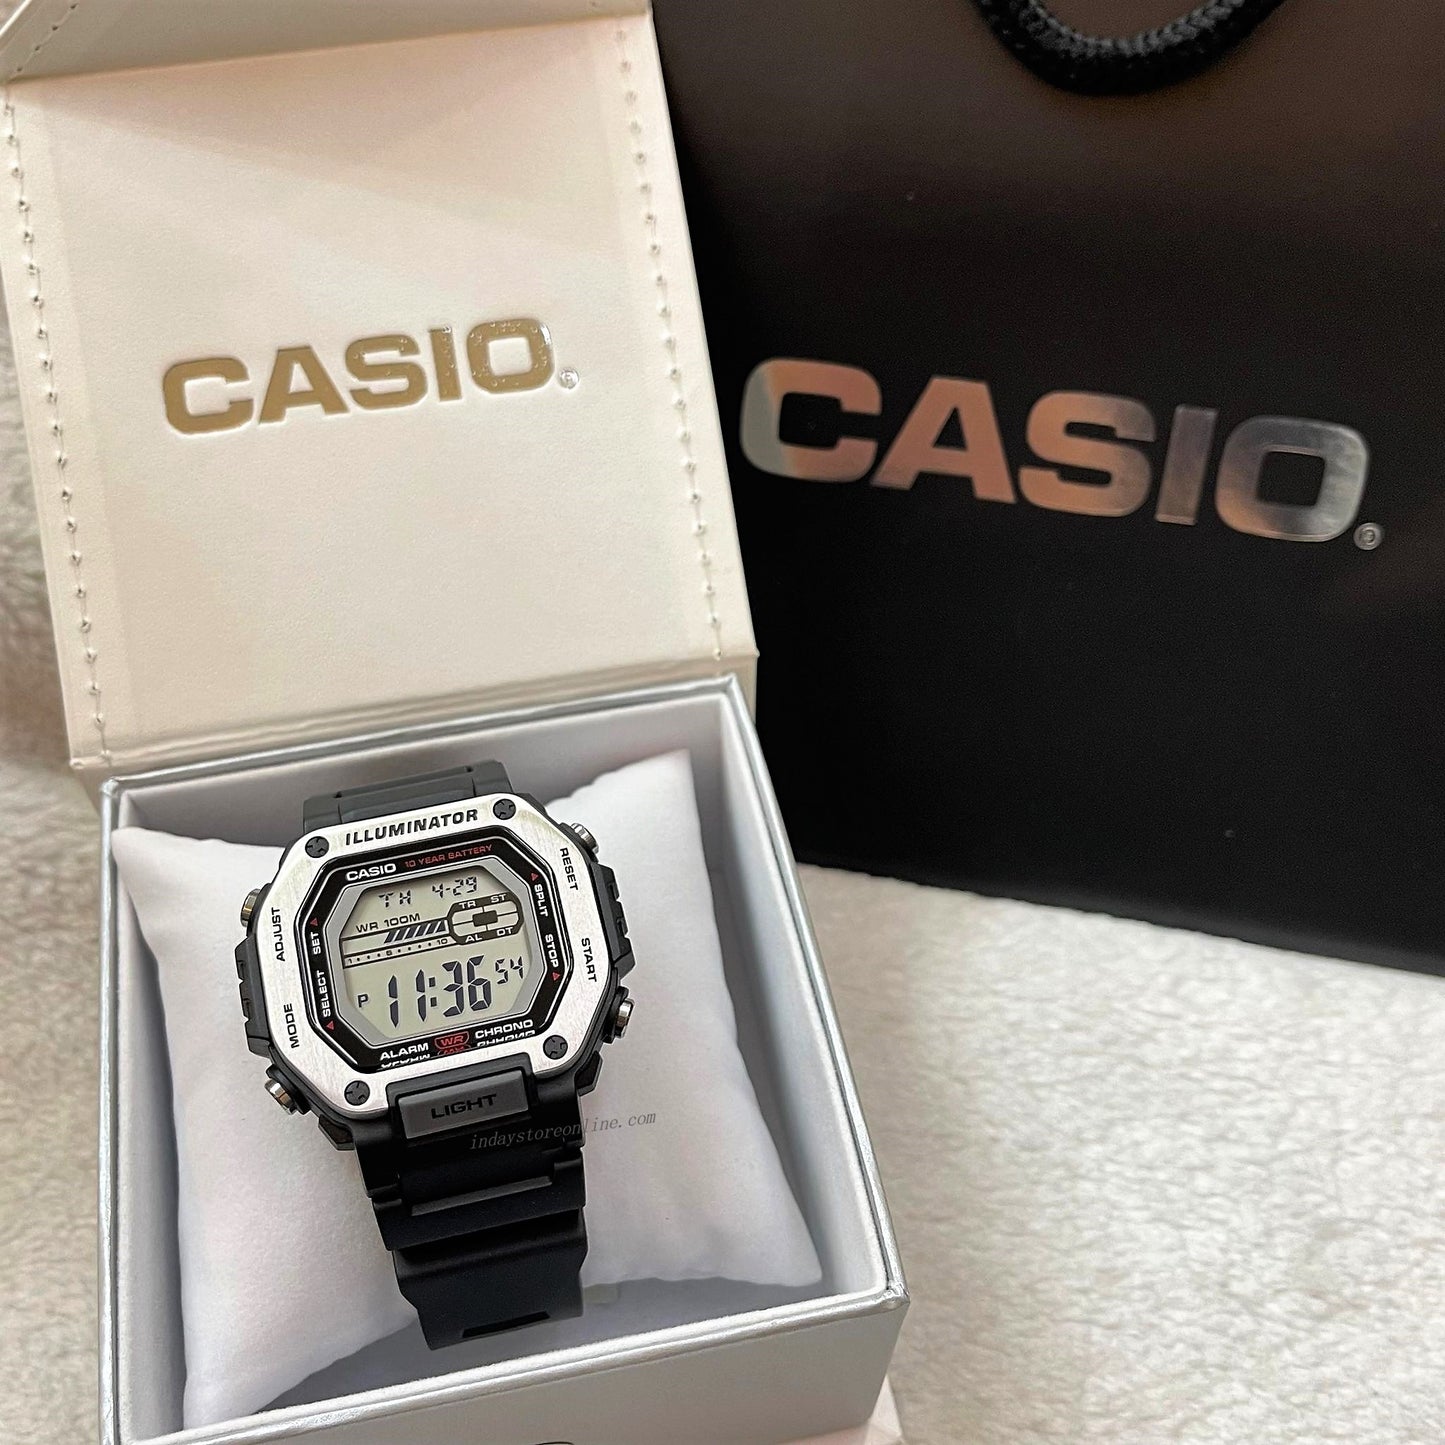 Casio Digital Men's Watch MWD-110H-1A Digital Resin Band Resin Glass Battery life: 70 years